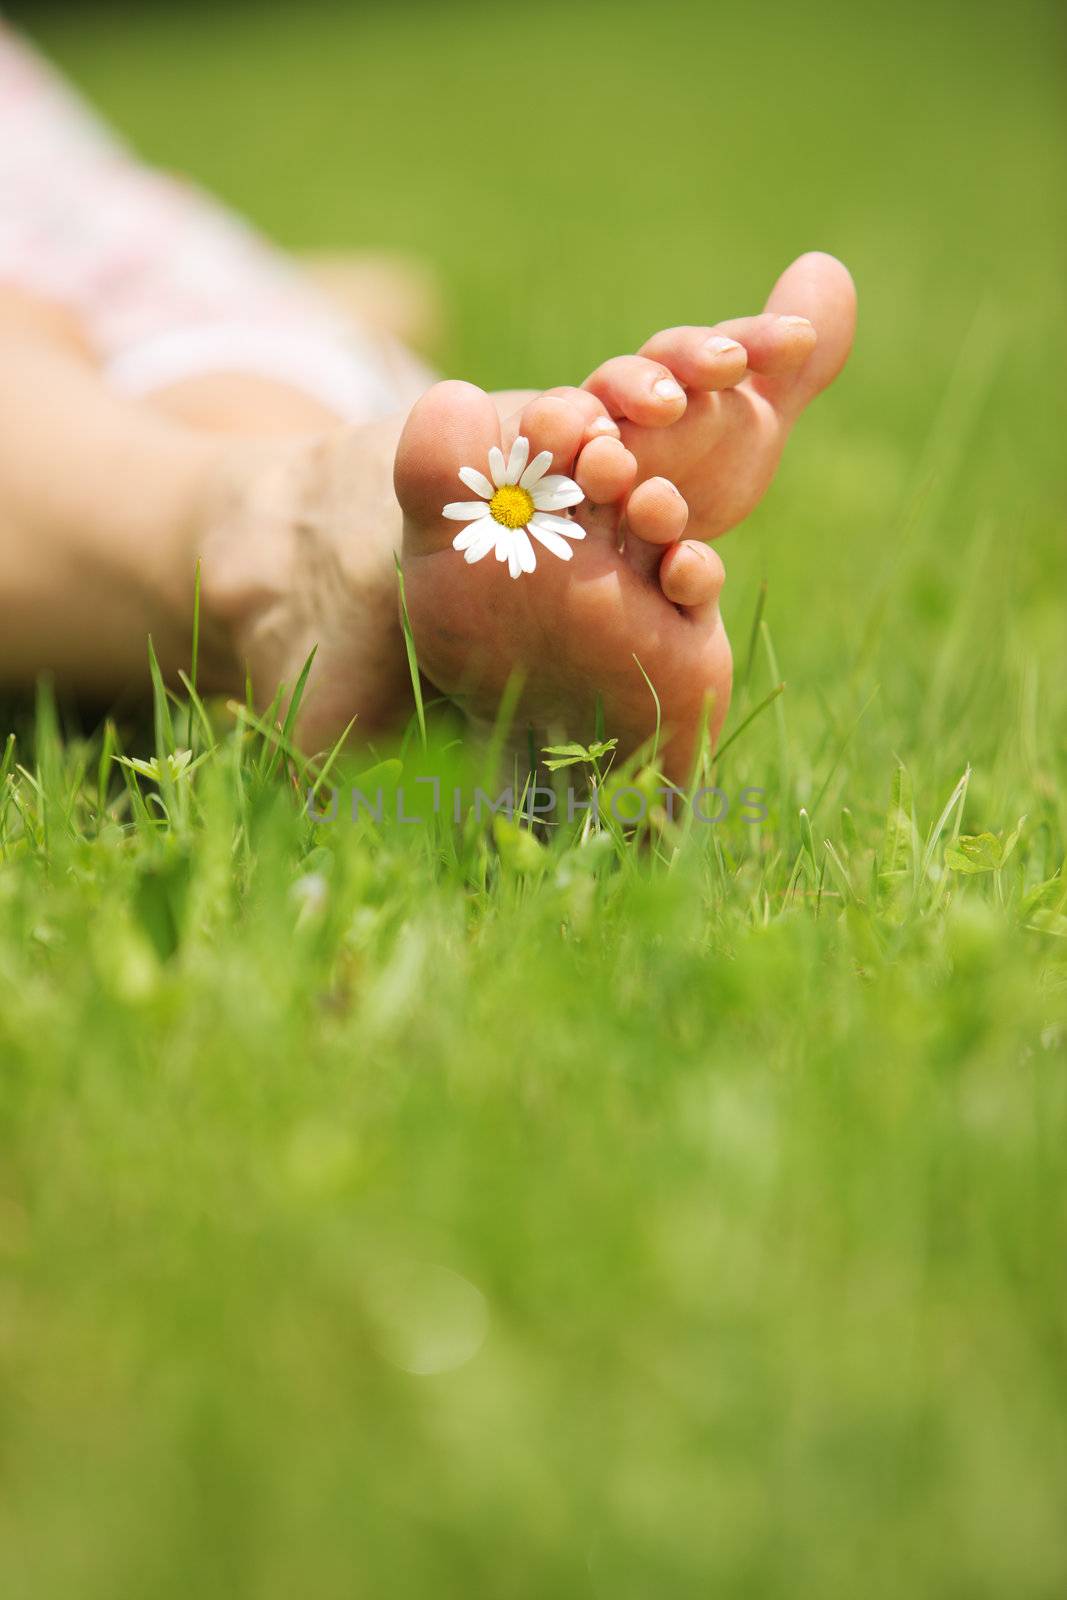 Daisy and bare feet on green grass, copy space